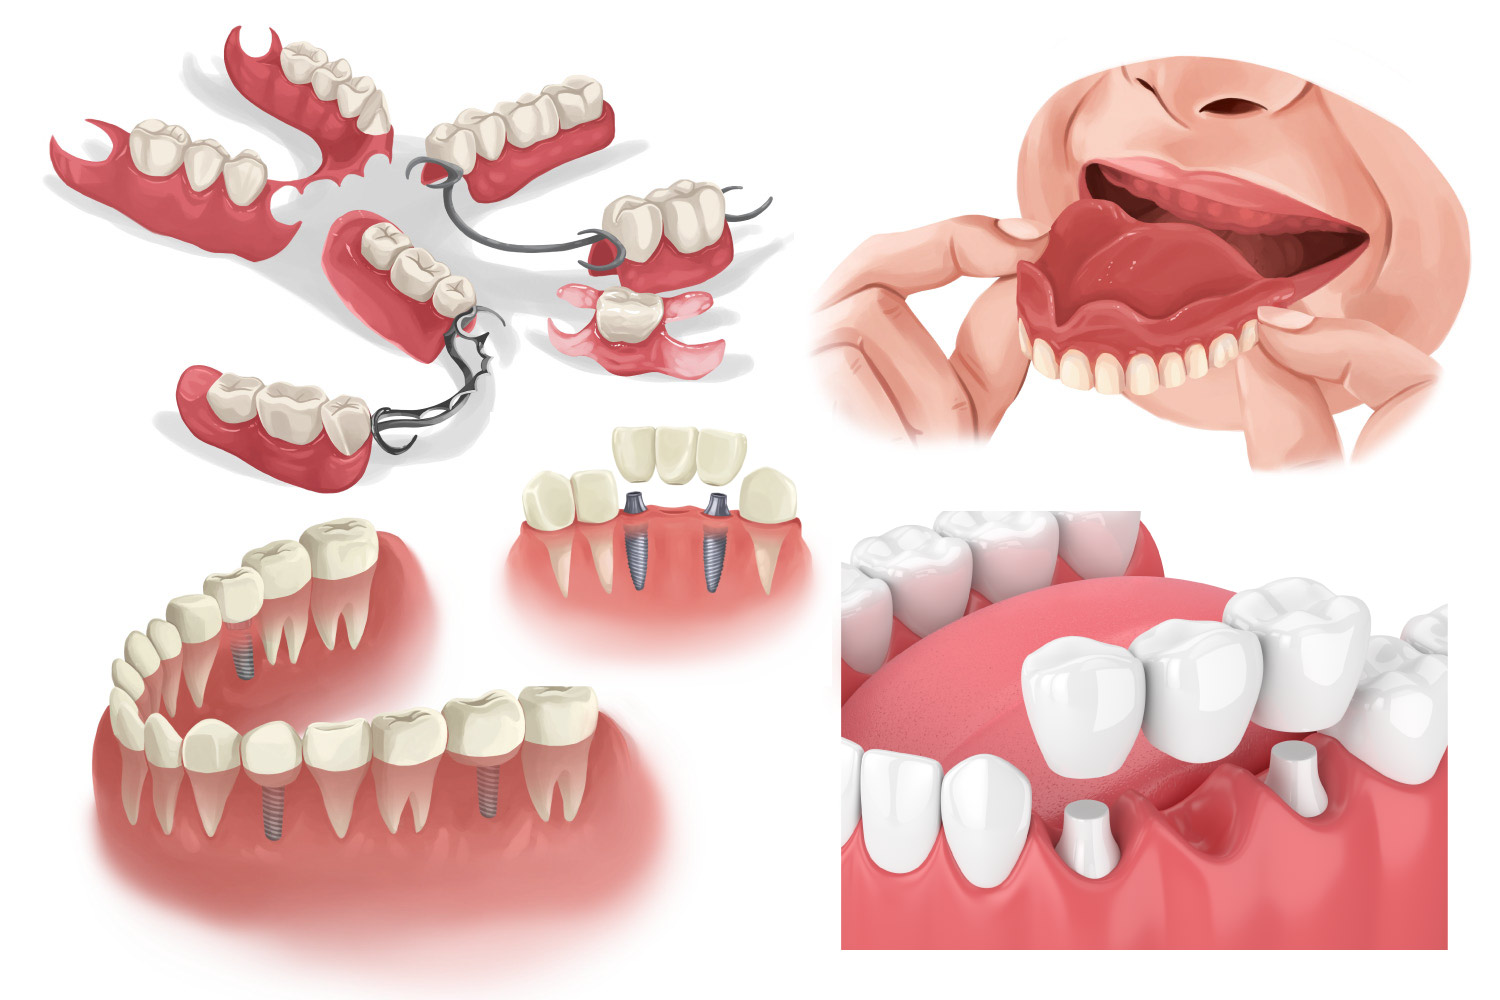 Images showing various configurations of tooth replacements using full dentures, partial dentures, dental bridges, and dental implants